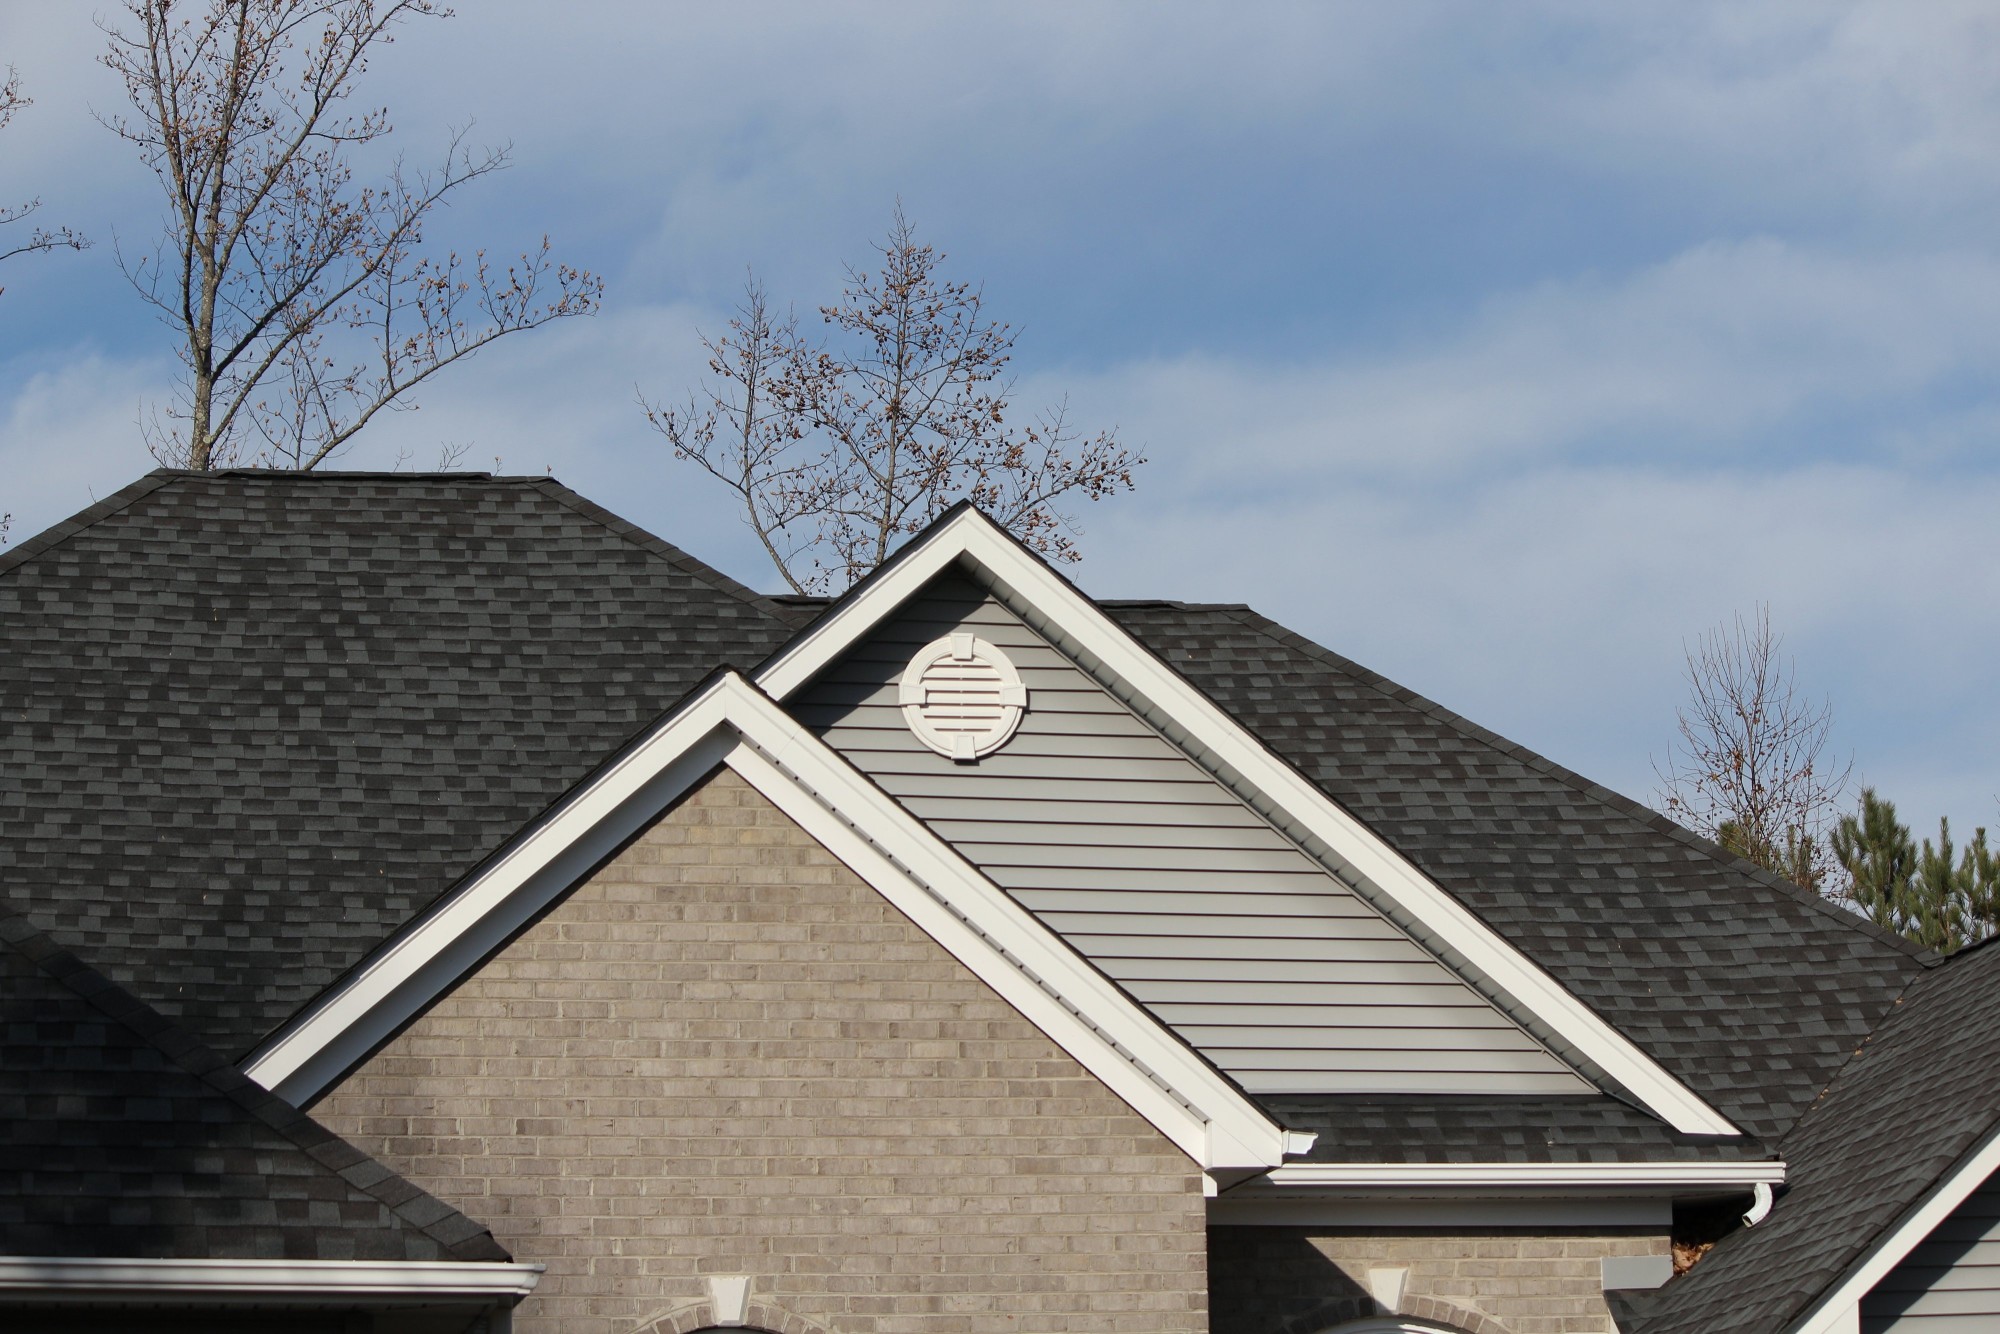 The Complete Guide to Finding and Hiring a Roofing Company